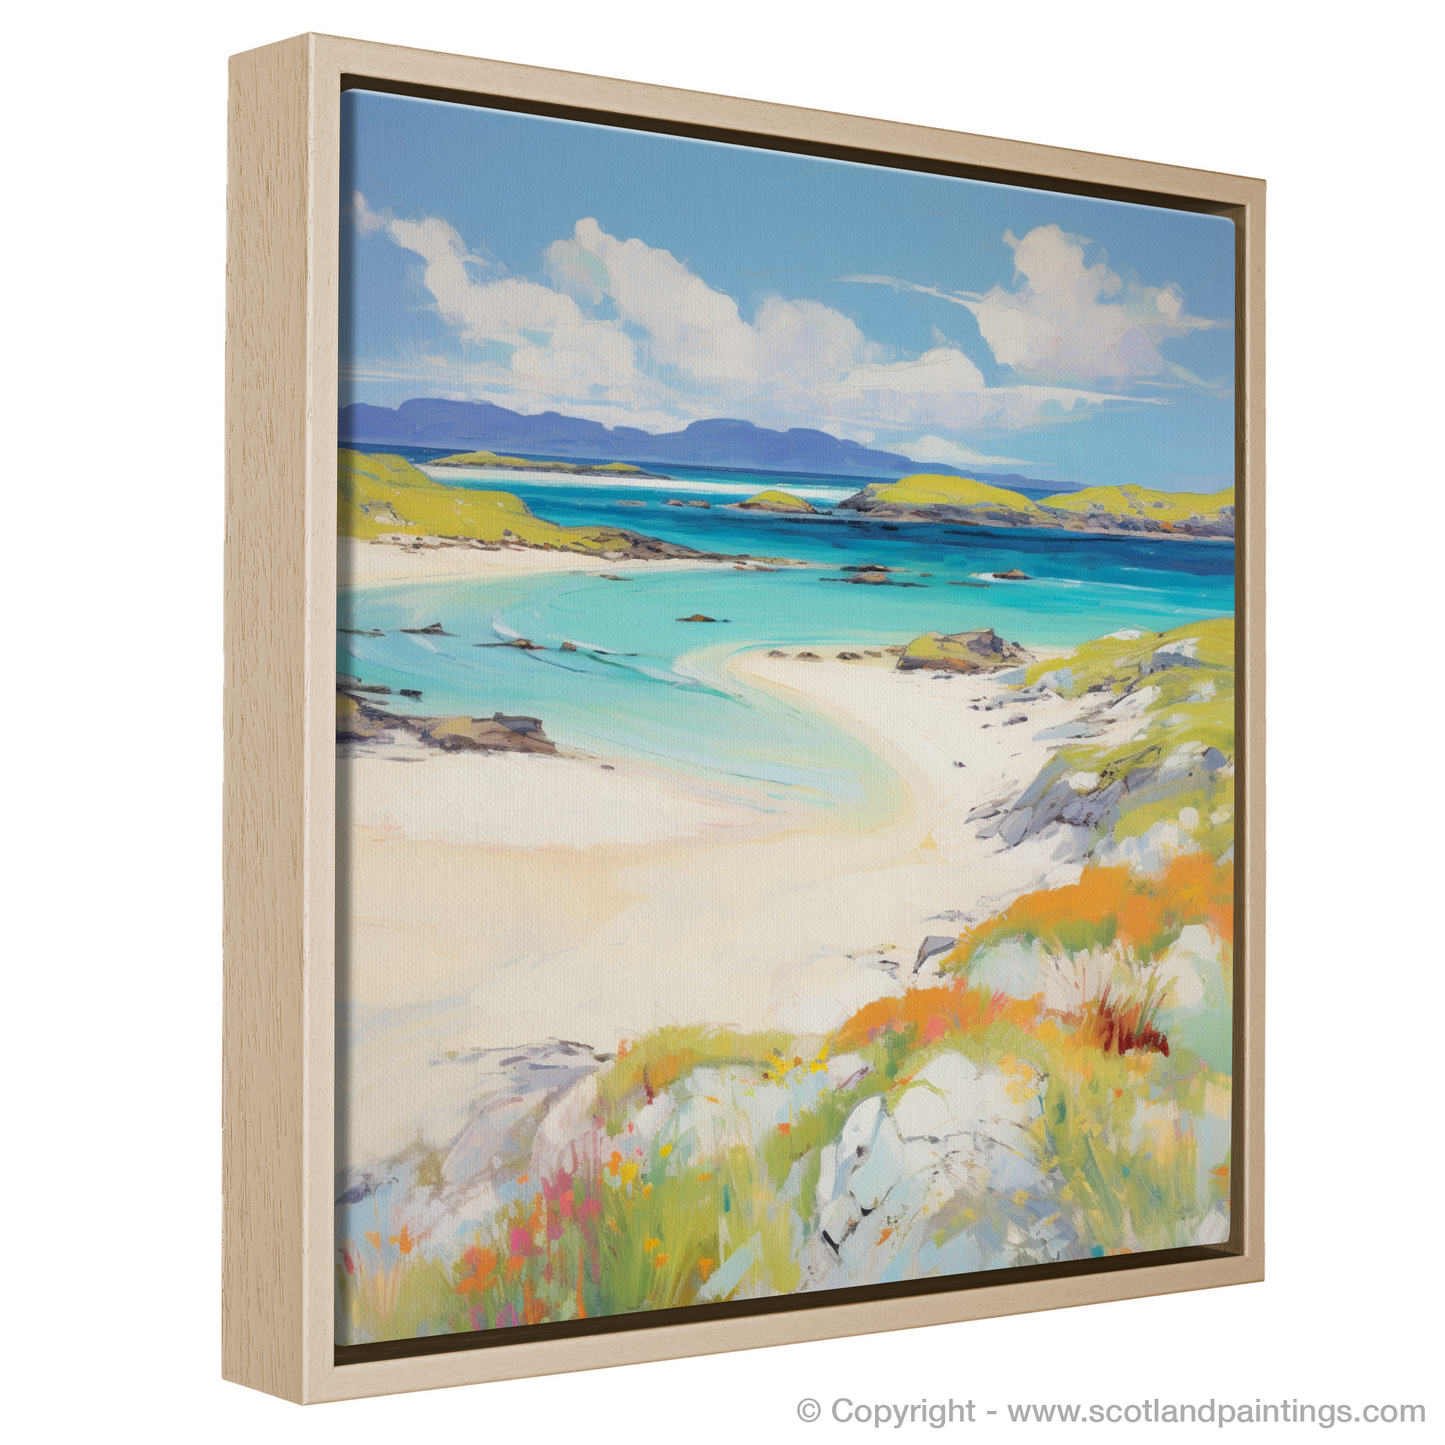 Painting and Art Print of Mellon Udrigle Beach, Wester Ross in summer entitled "Summer Serenade at Mellon Udrigle Beach".